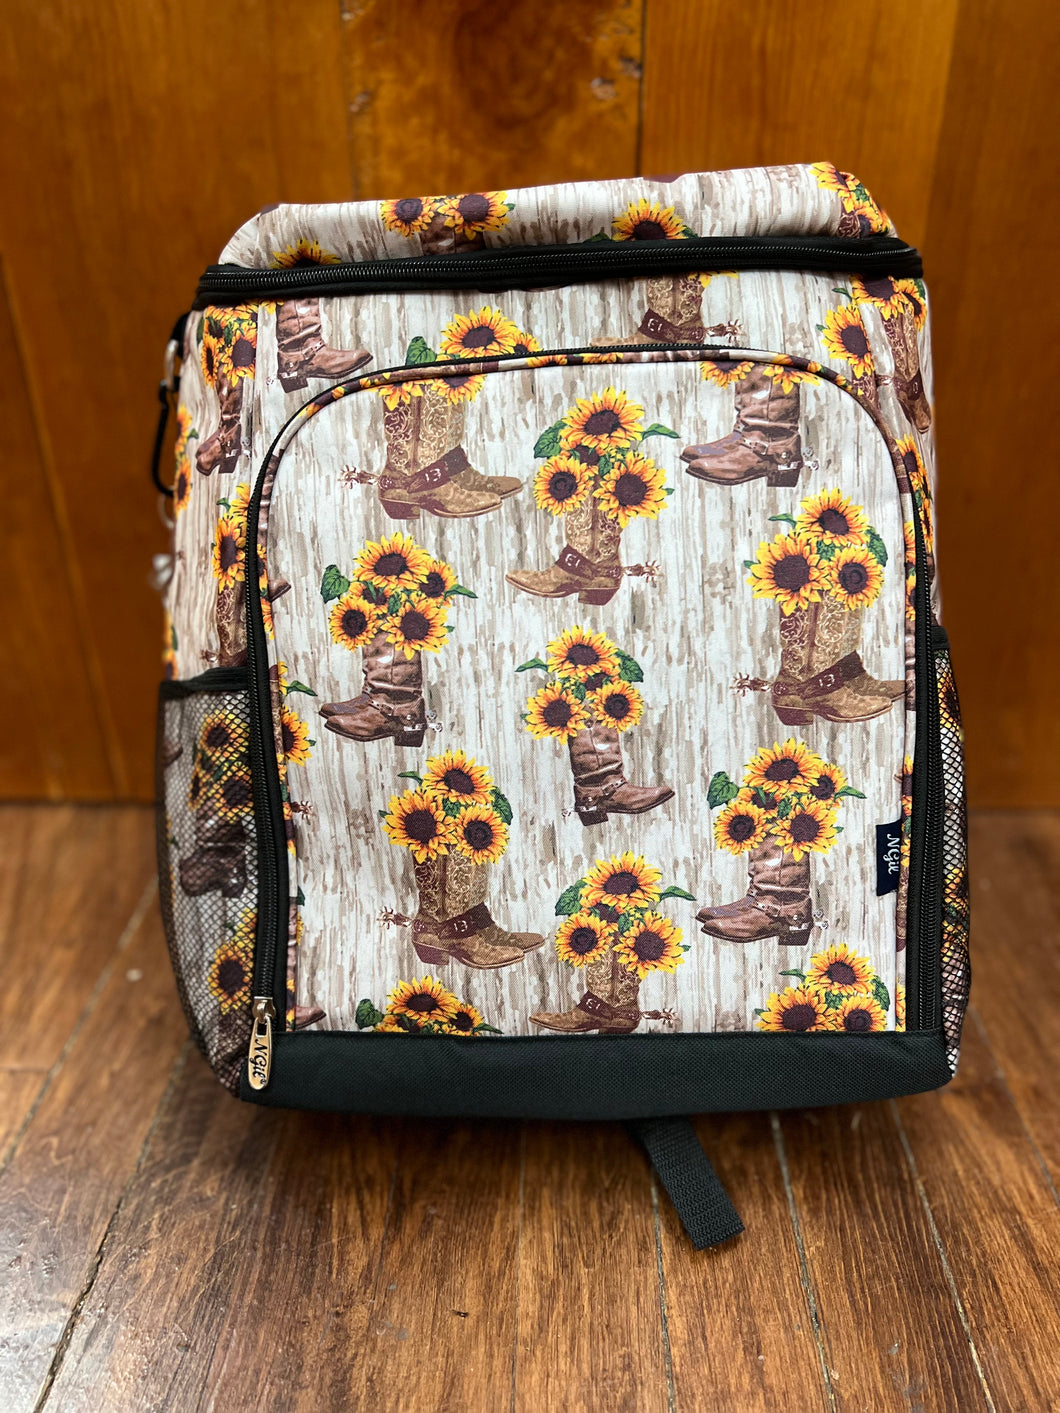 Boots & Sunflowers Backpack Cooler